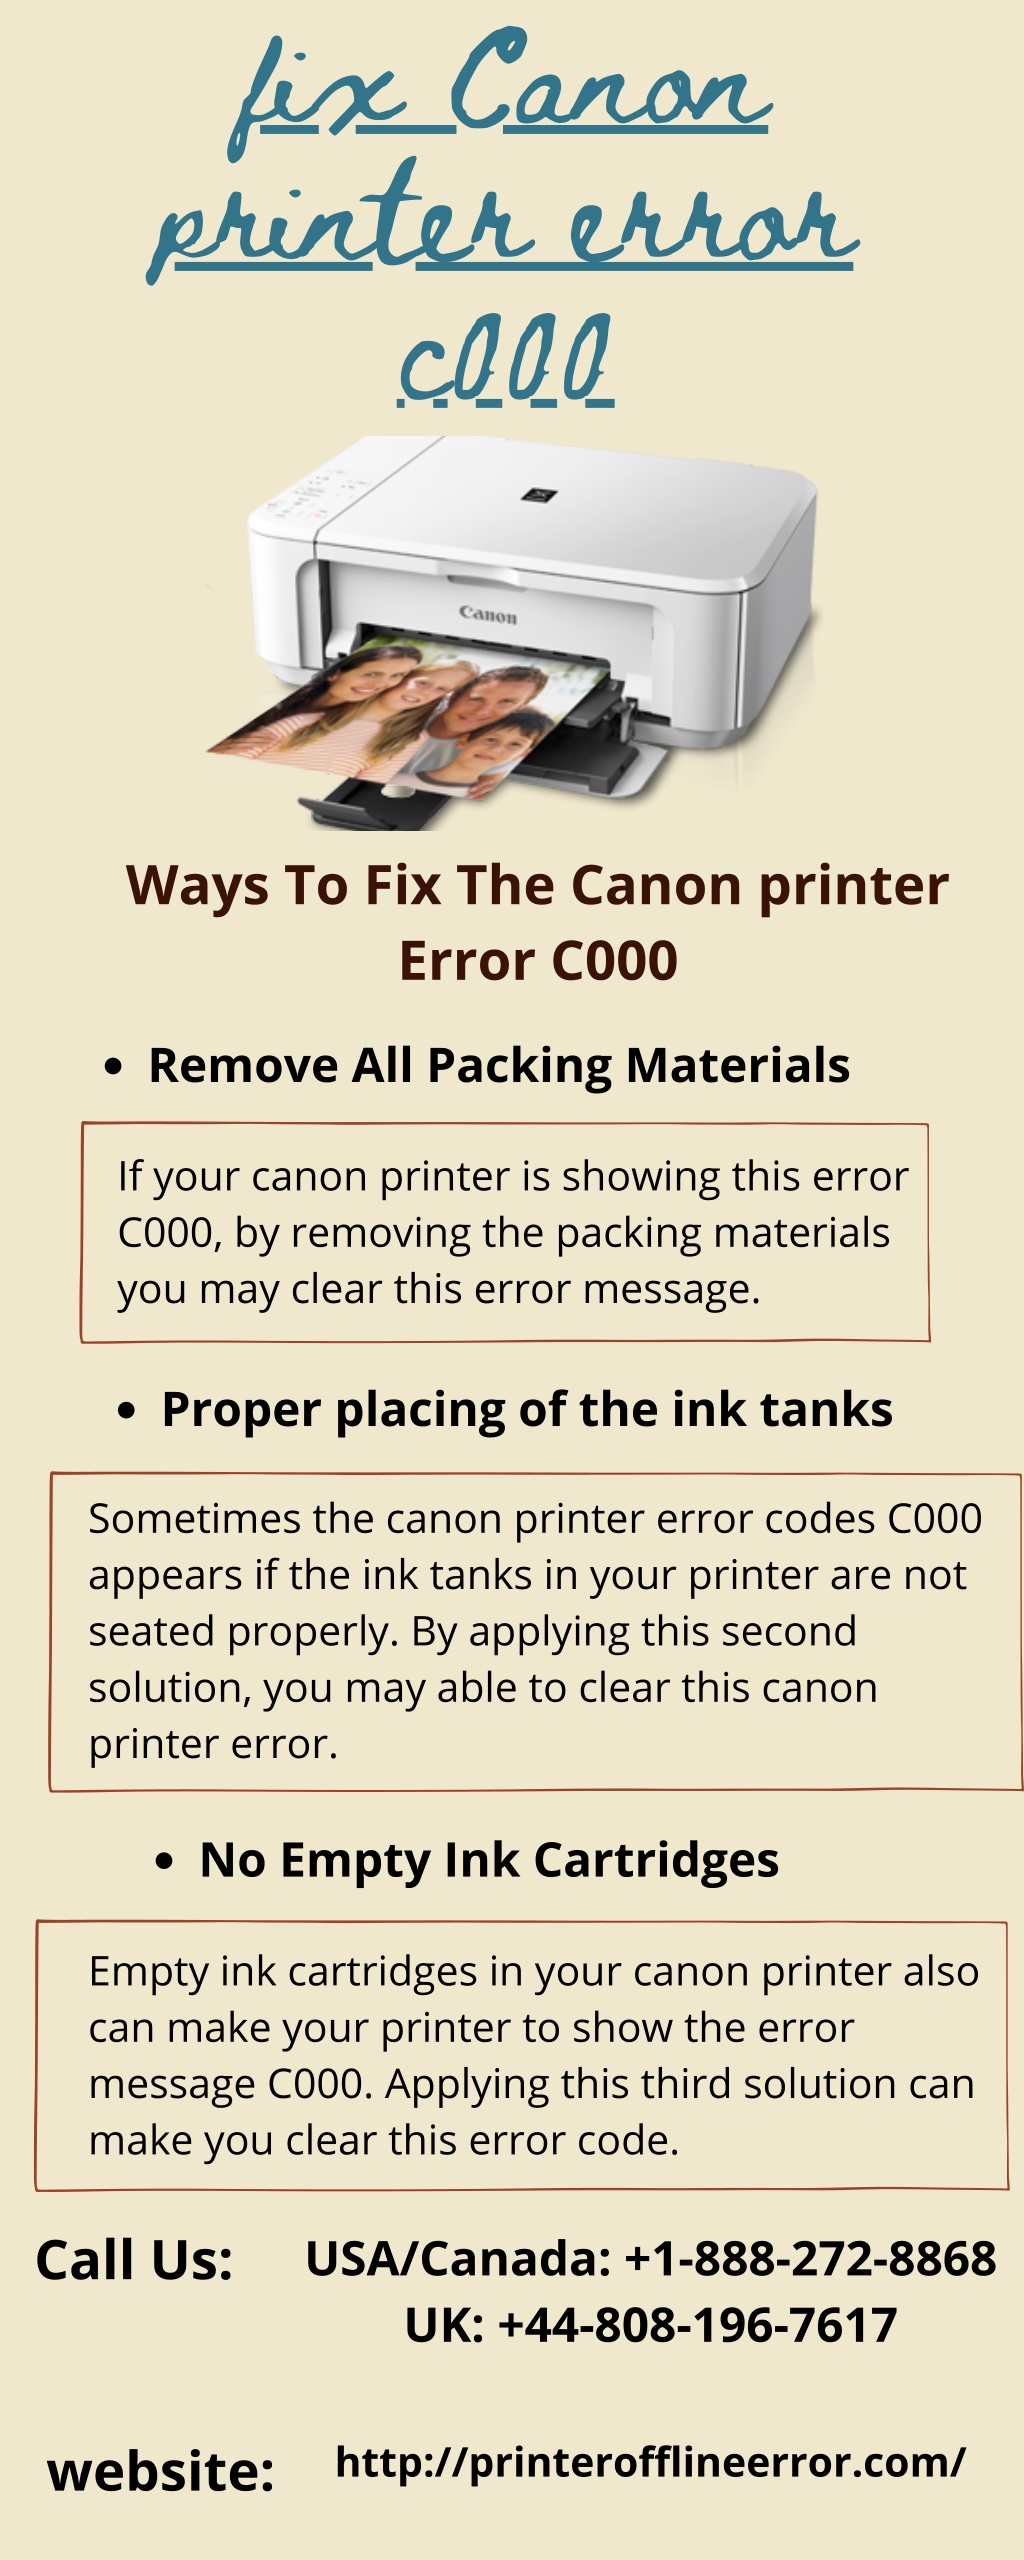 Ppt Guide To Fix Canon Printer Error C000 Powerpoint Presentation Free Download Id10801581 8987